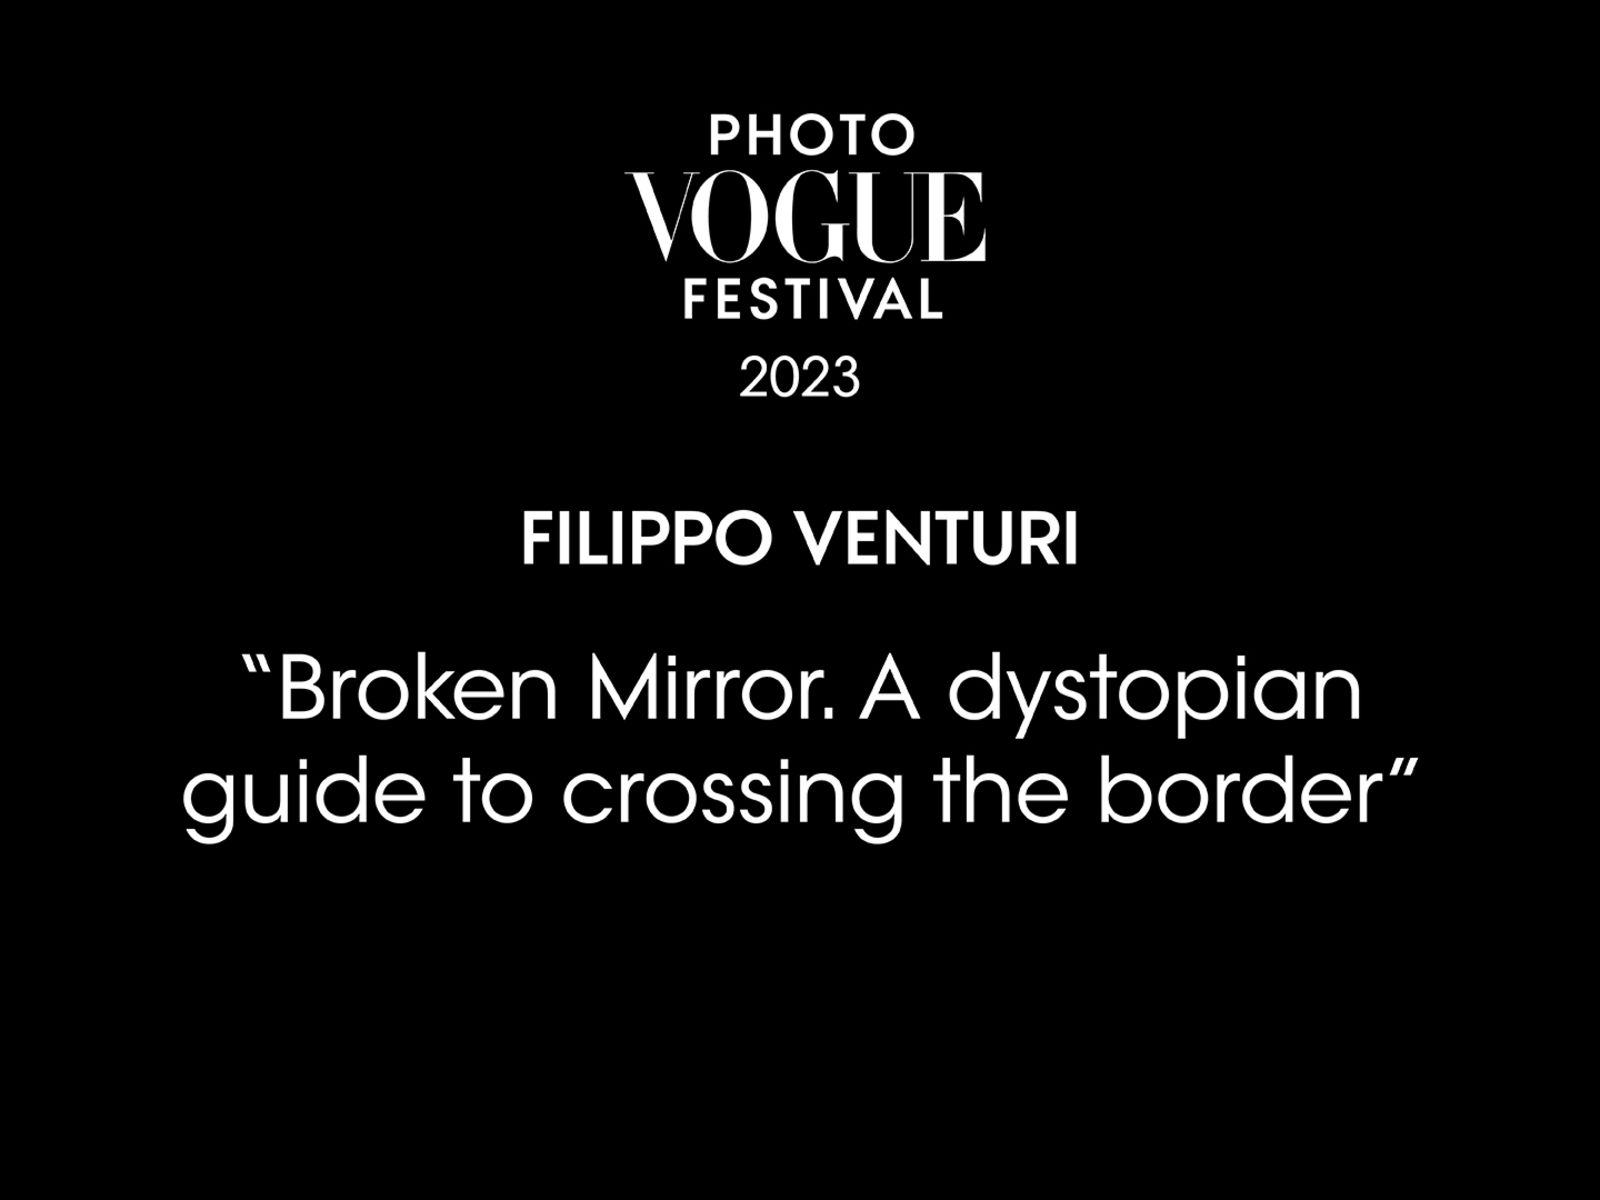 Broken Mirror. A dystopian guide to crossing the border | PhotoVogue Festival 2023: What Makes Us Human? Image in the Age of A.I.